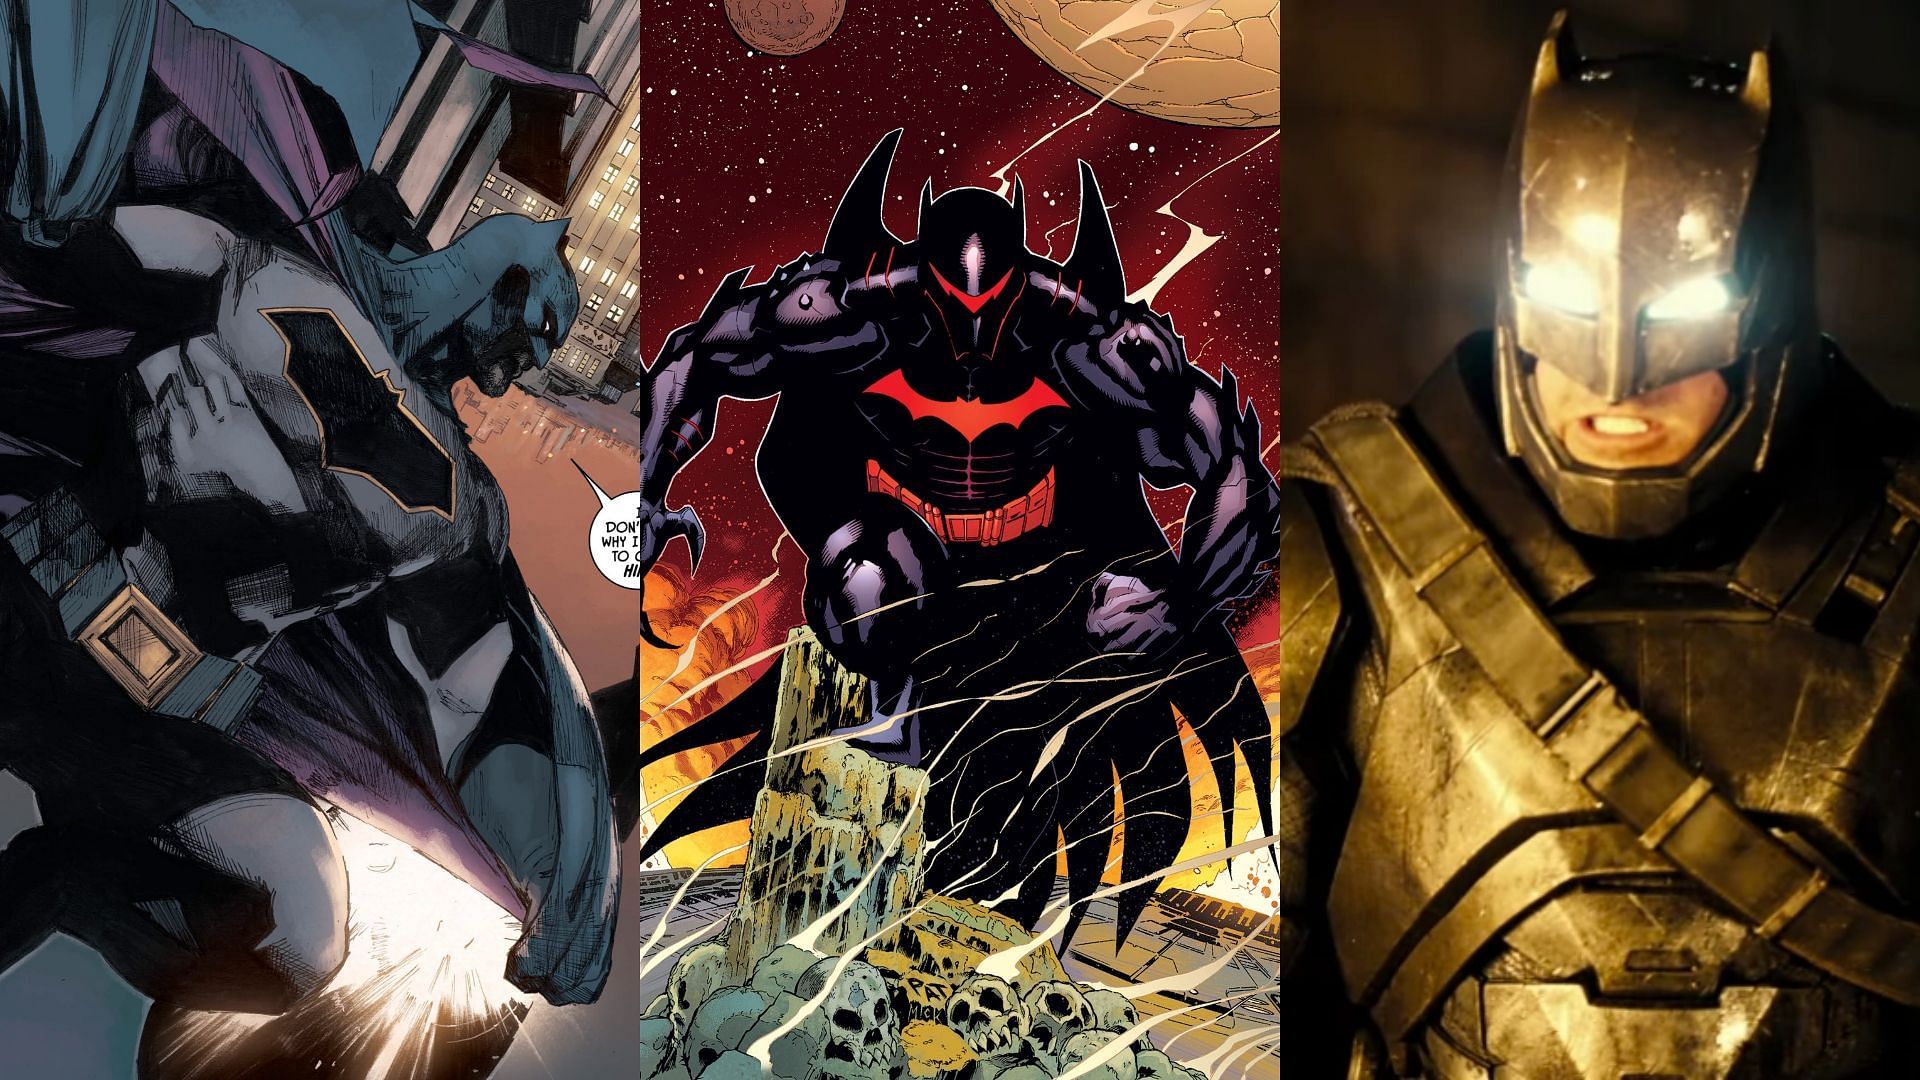 all the different batman suits